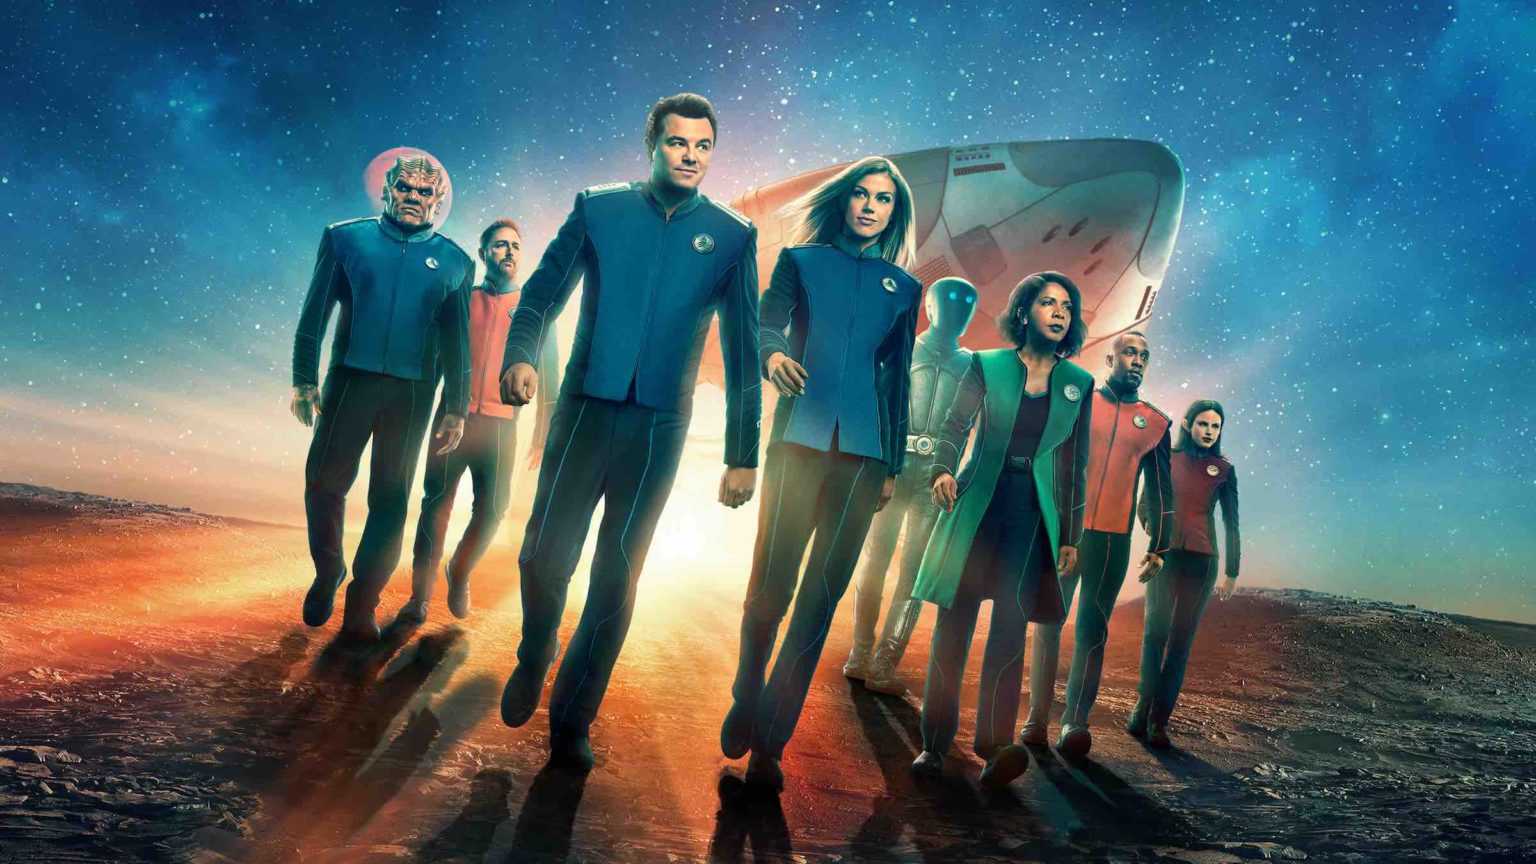 The Seth MacFarlane-helmed sci-fi series 'The Orville' seems to exist in a pop culture abyss. Here's why 'The Orville' is more 'Star Trek' than 'Picard'.